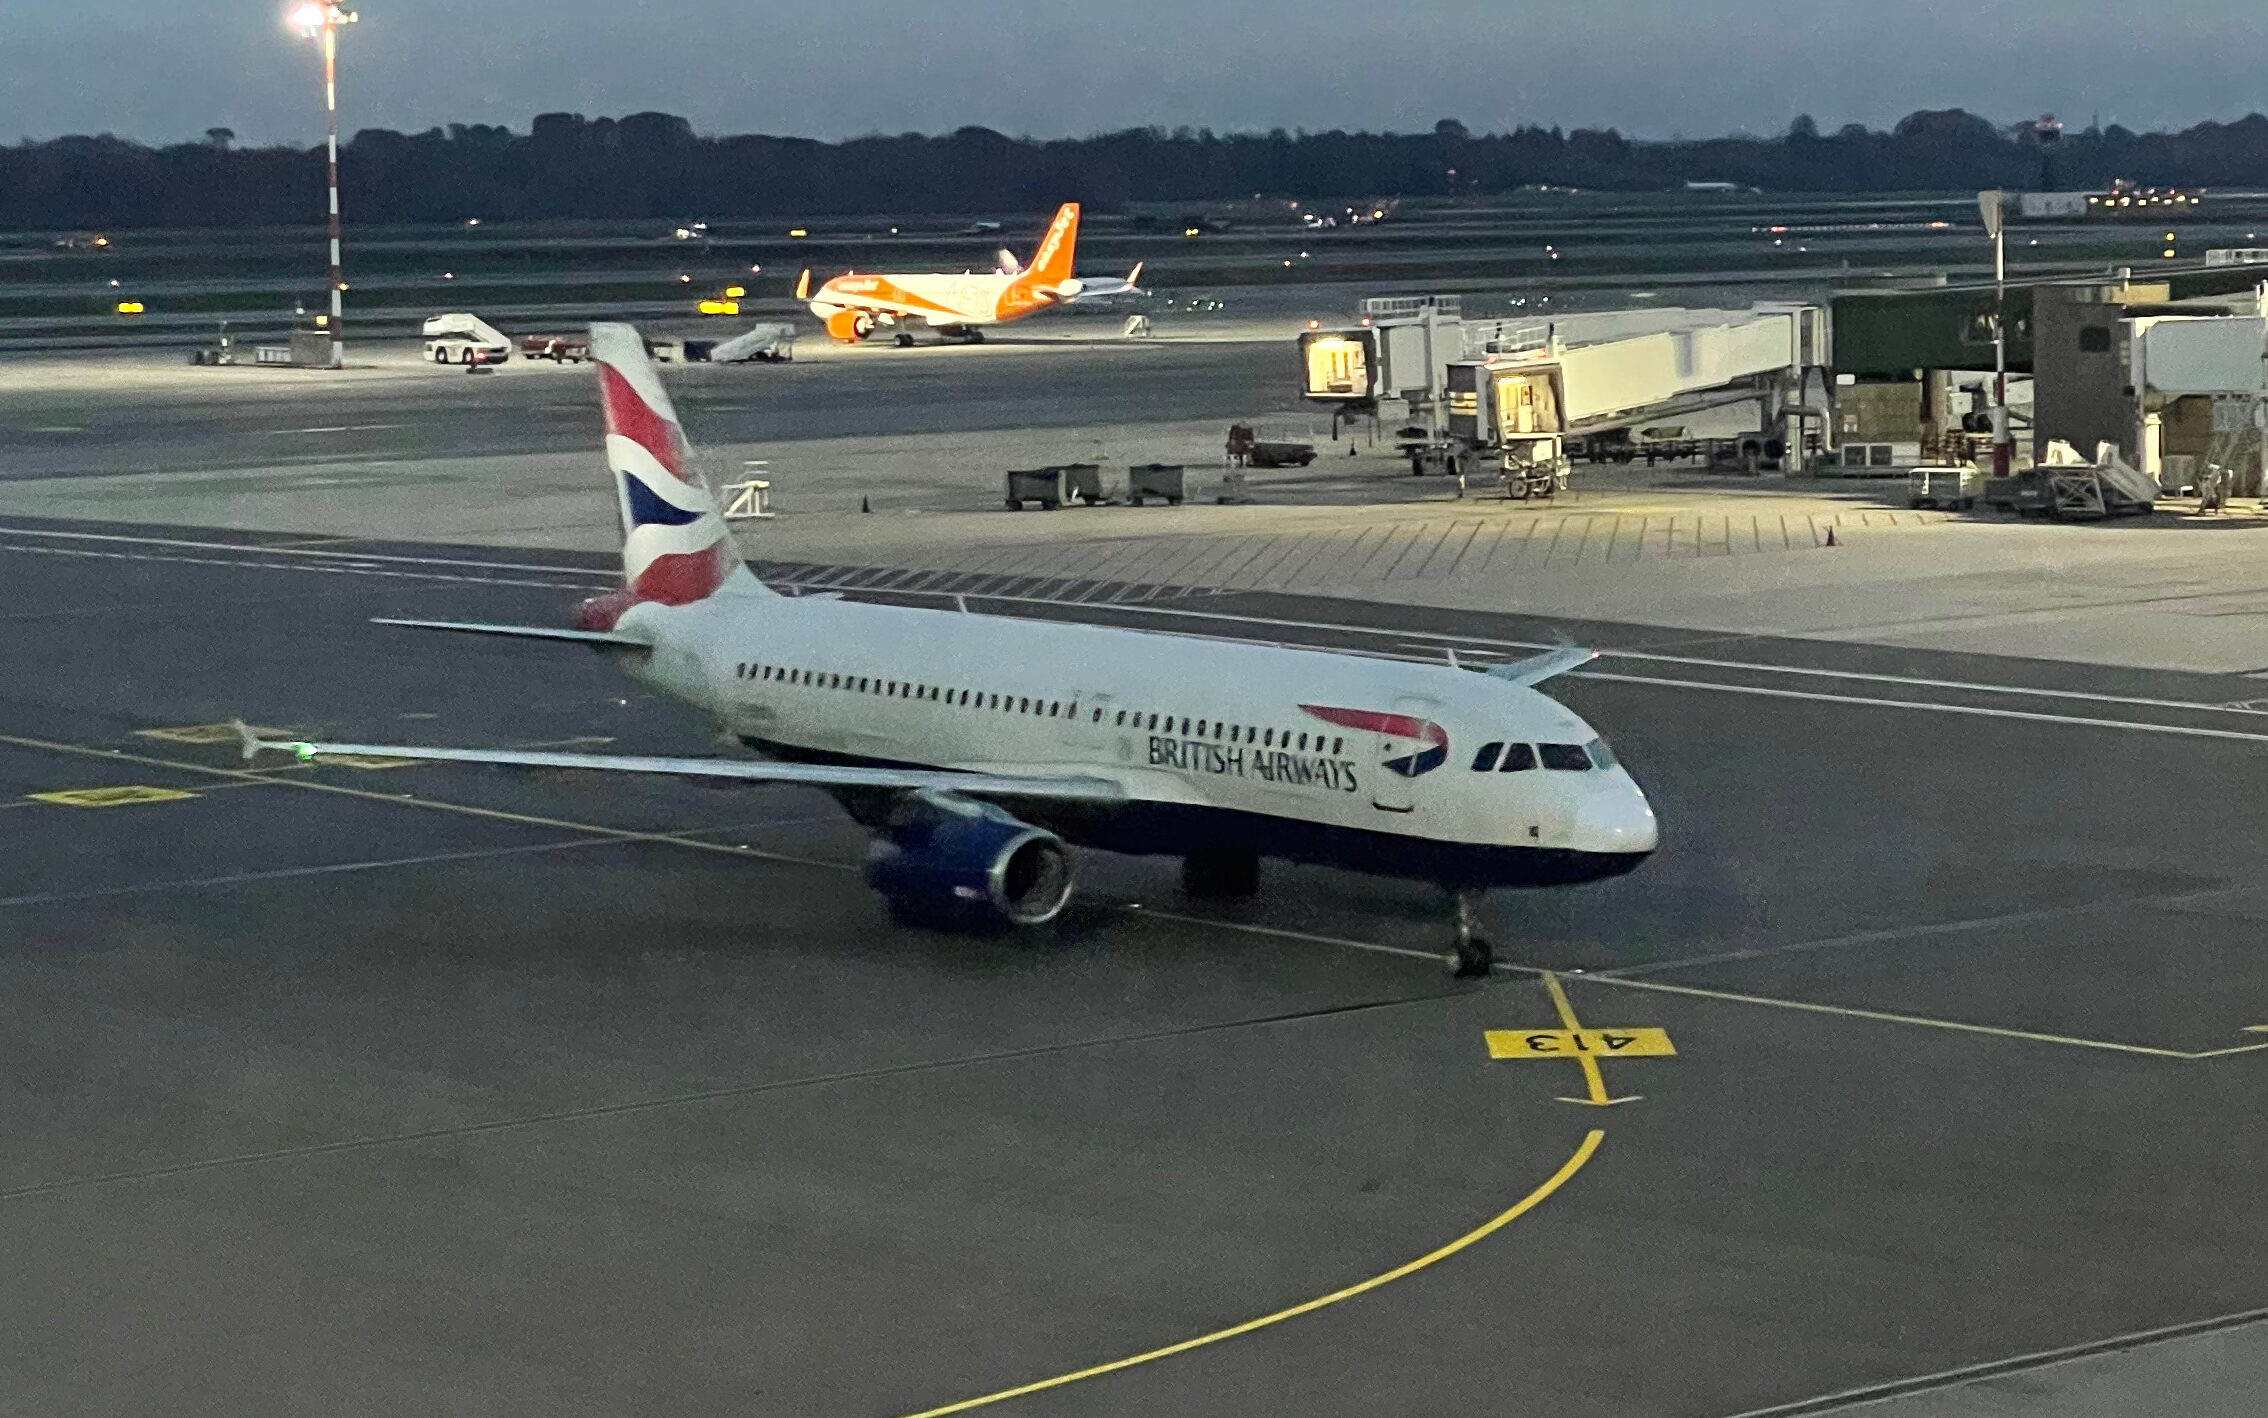 British Airways Plane taxiing towards the gate